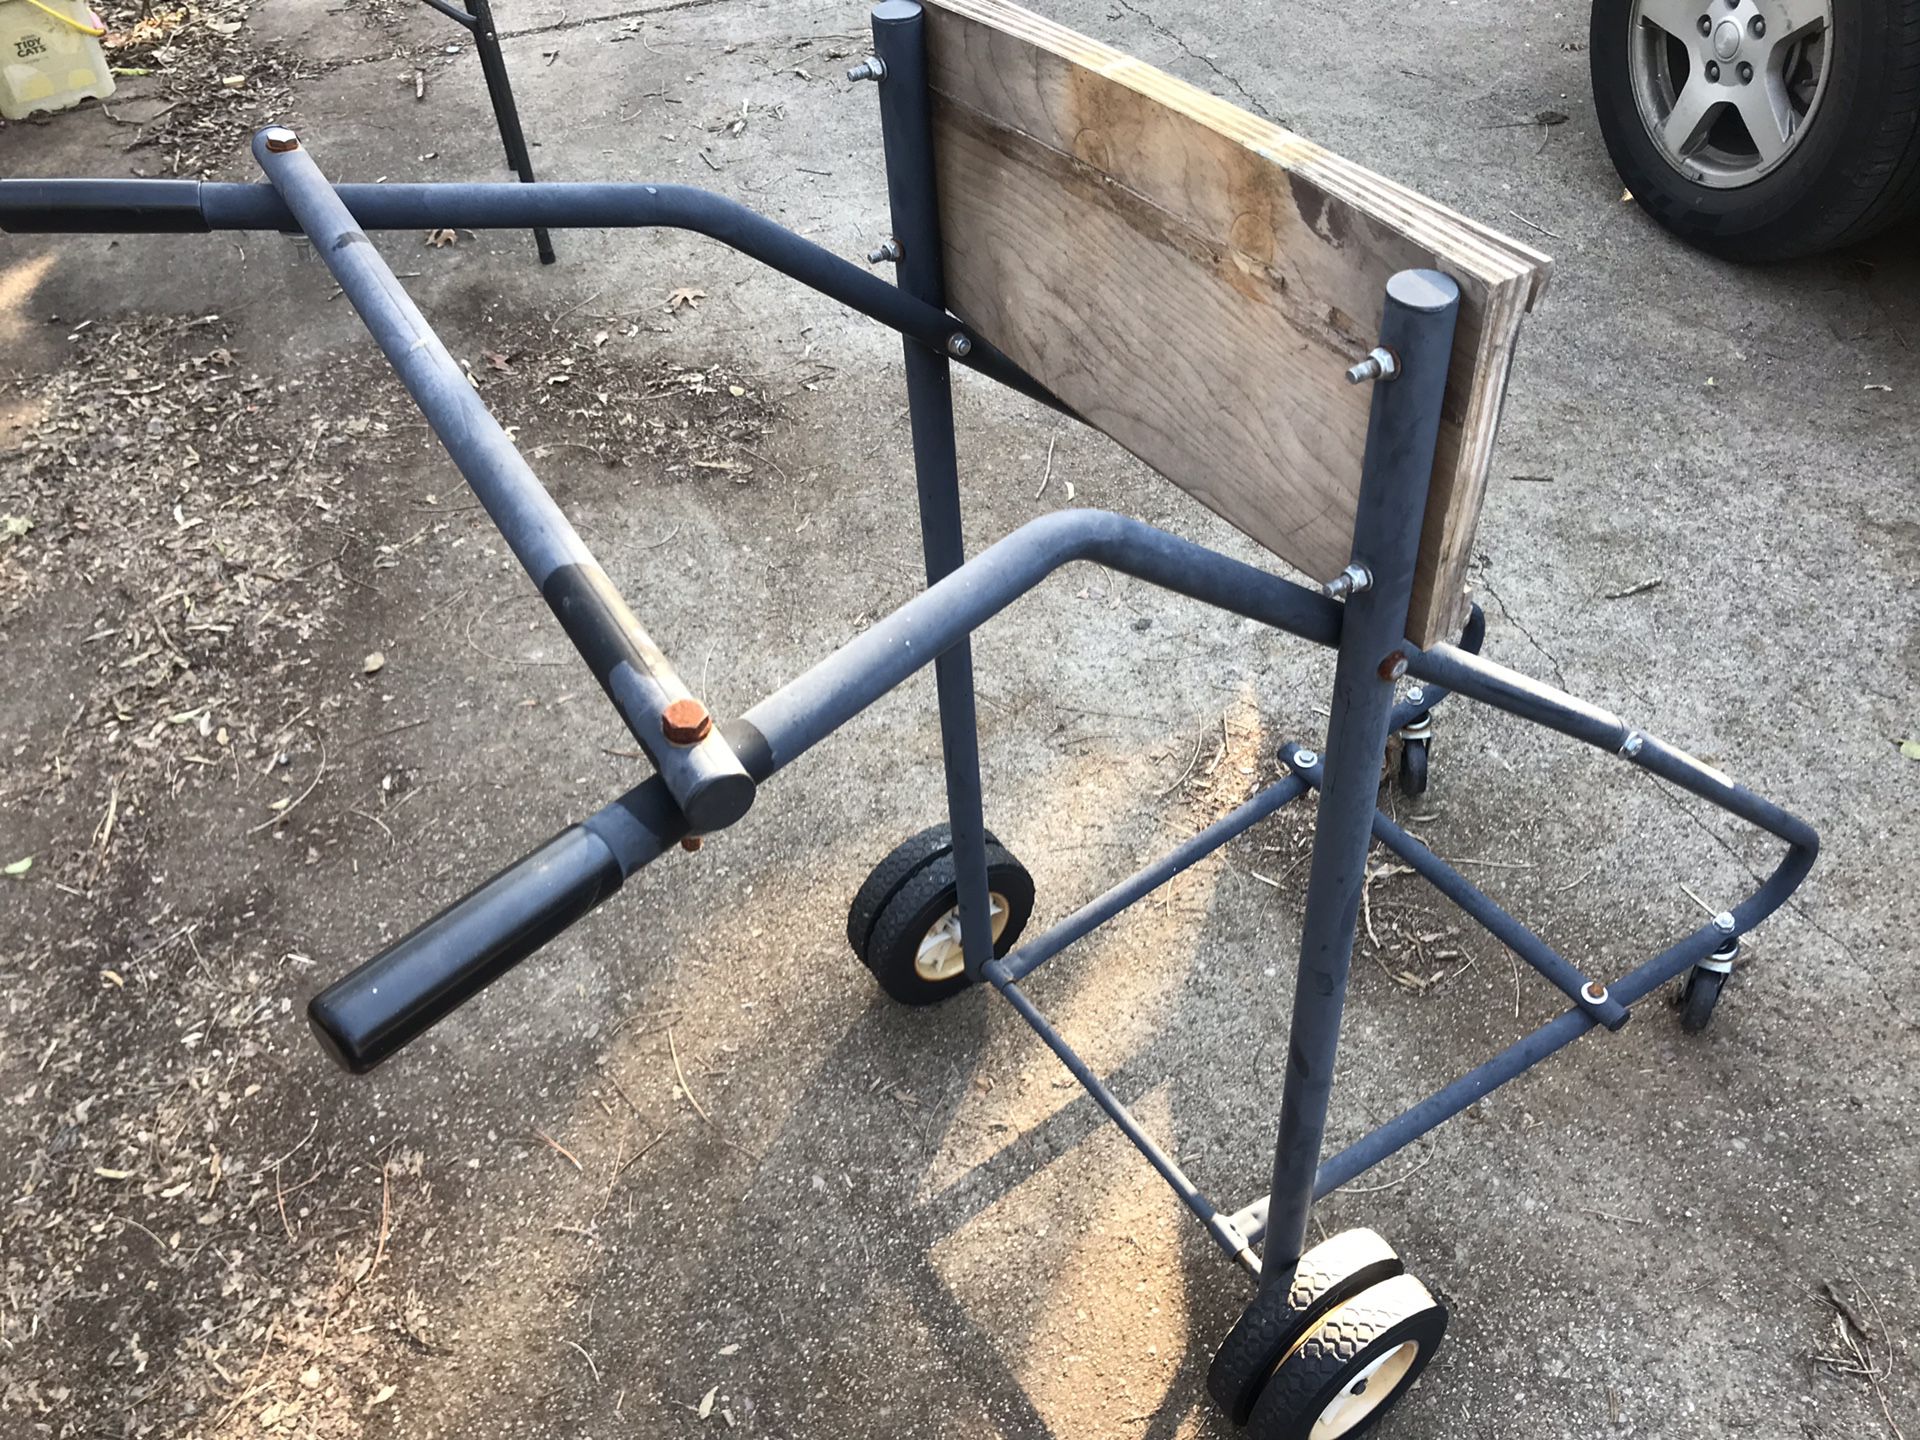 Outboard motor stand/dolly